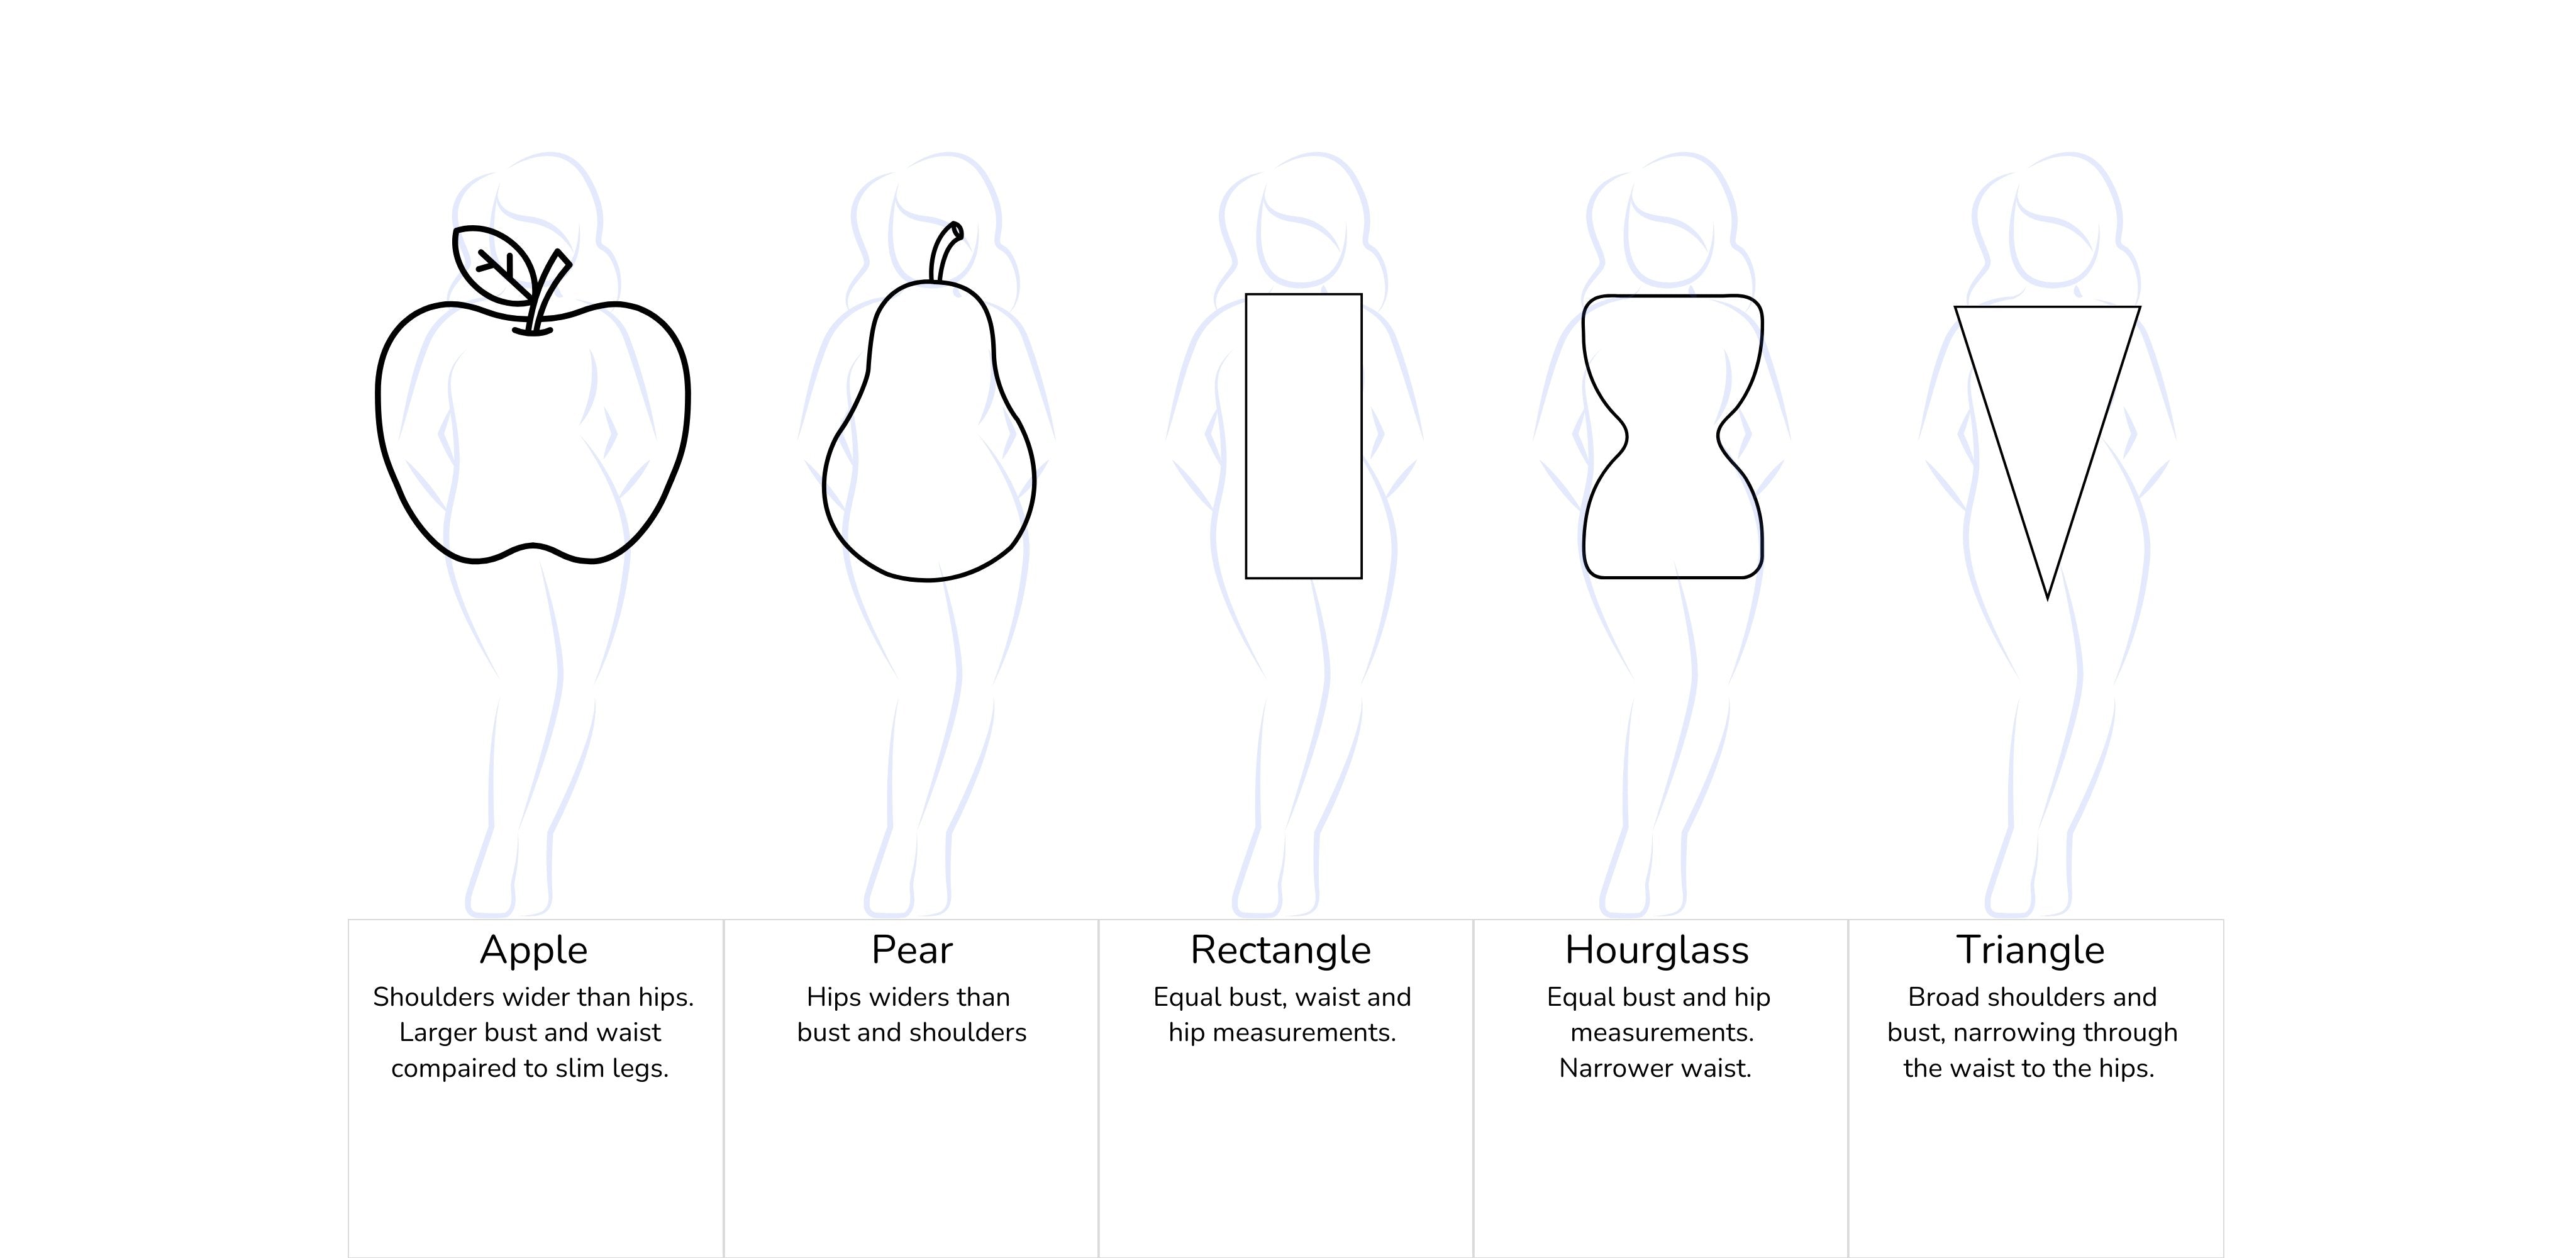 What dress to wear if you are an apple shape. What dress to wear if you are an pear shape.